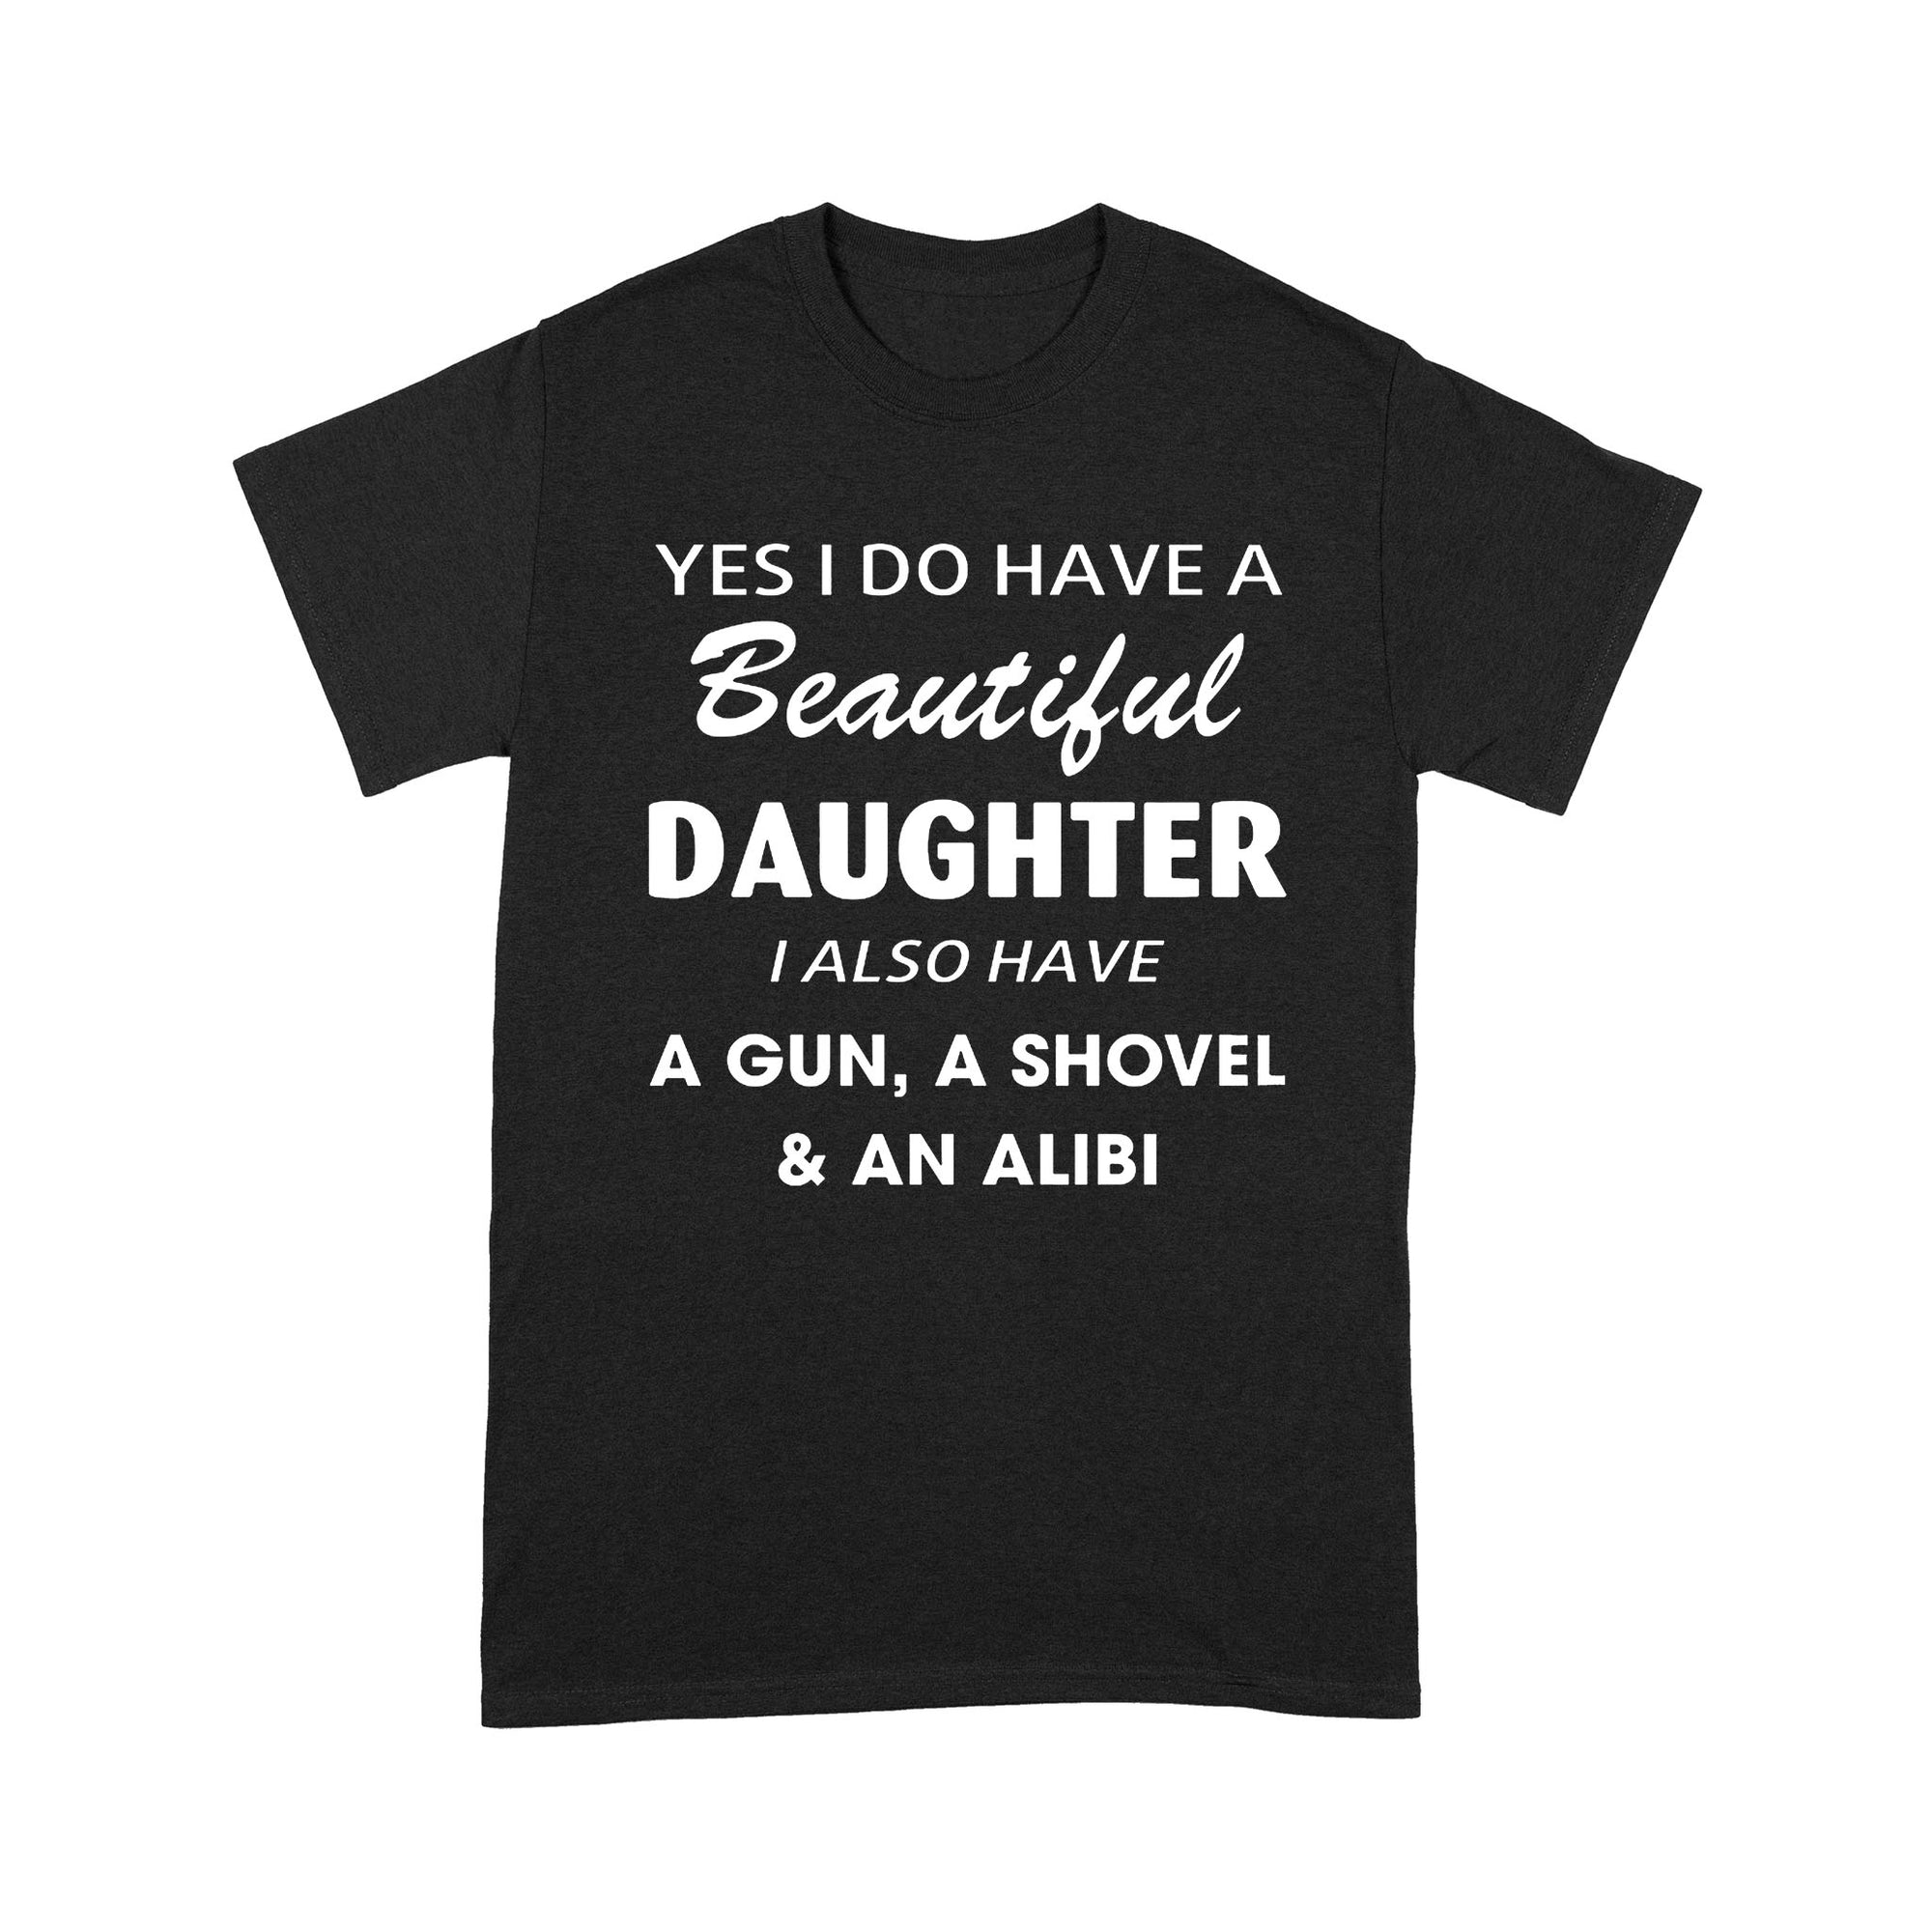 Gift Ideas for Dad Yes I Do Have A Beautiful Daughter I Also Have A Gun, A Shovel and An Alibi (2) - Standard T-shirt